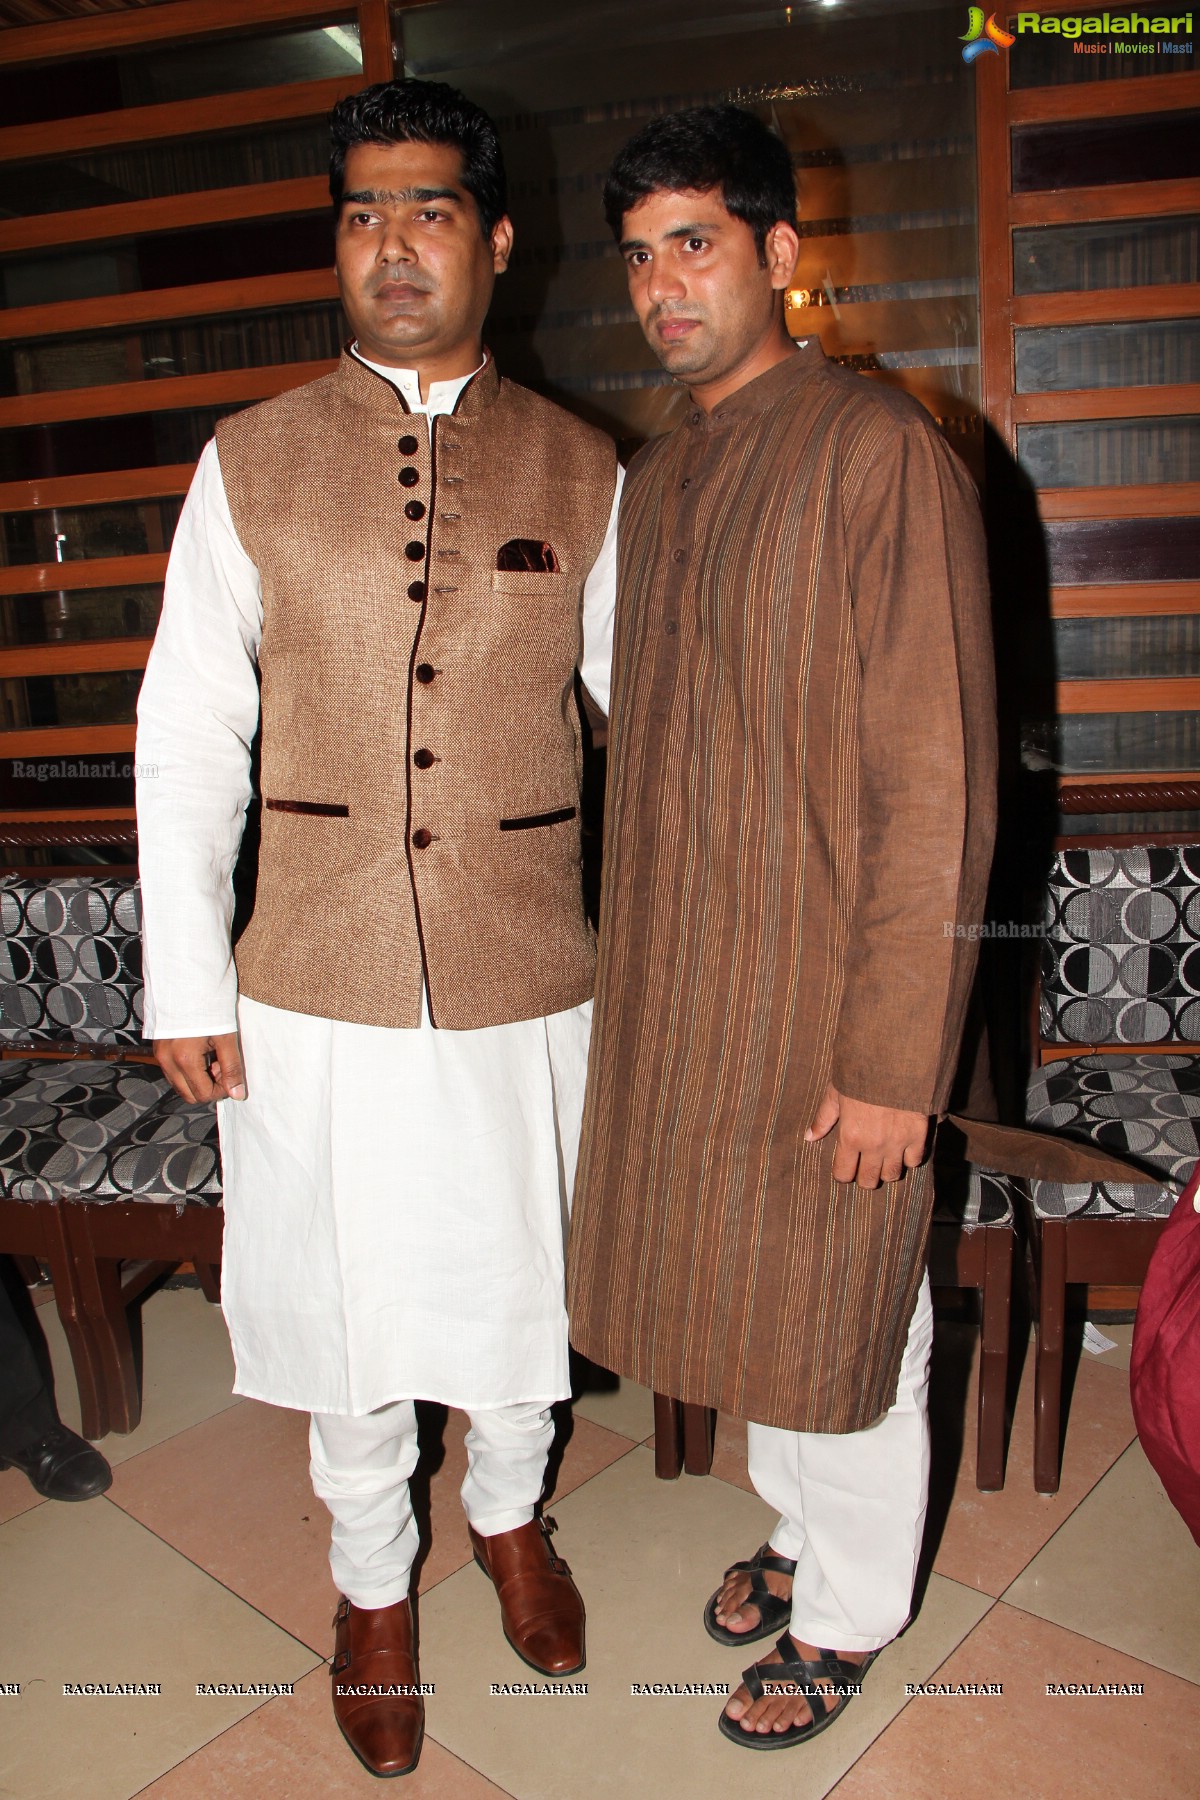 Iftar Party at Astoria Restaurant - Hosted by Fathe Affan and Bina Singh